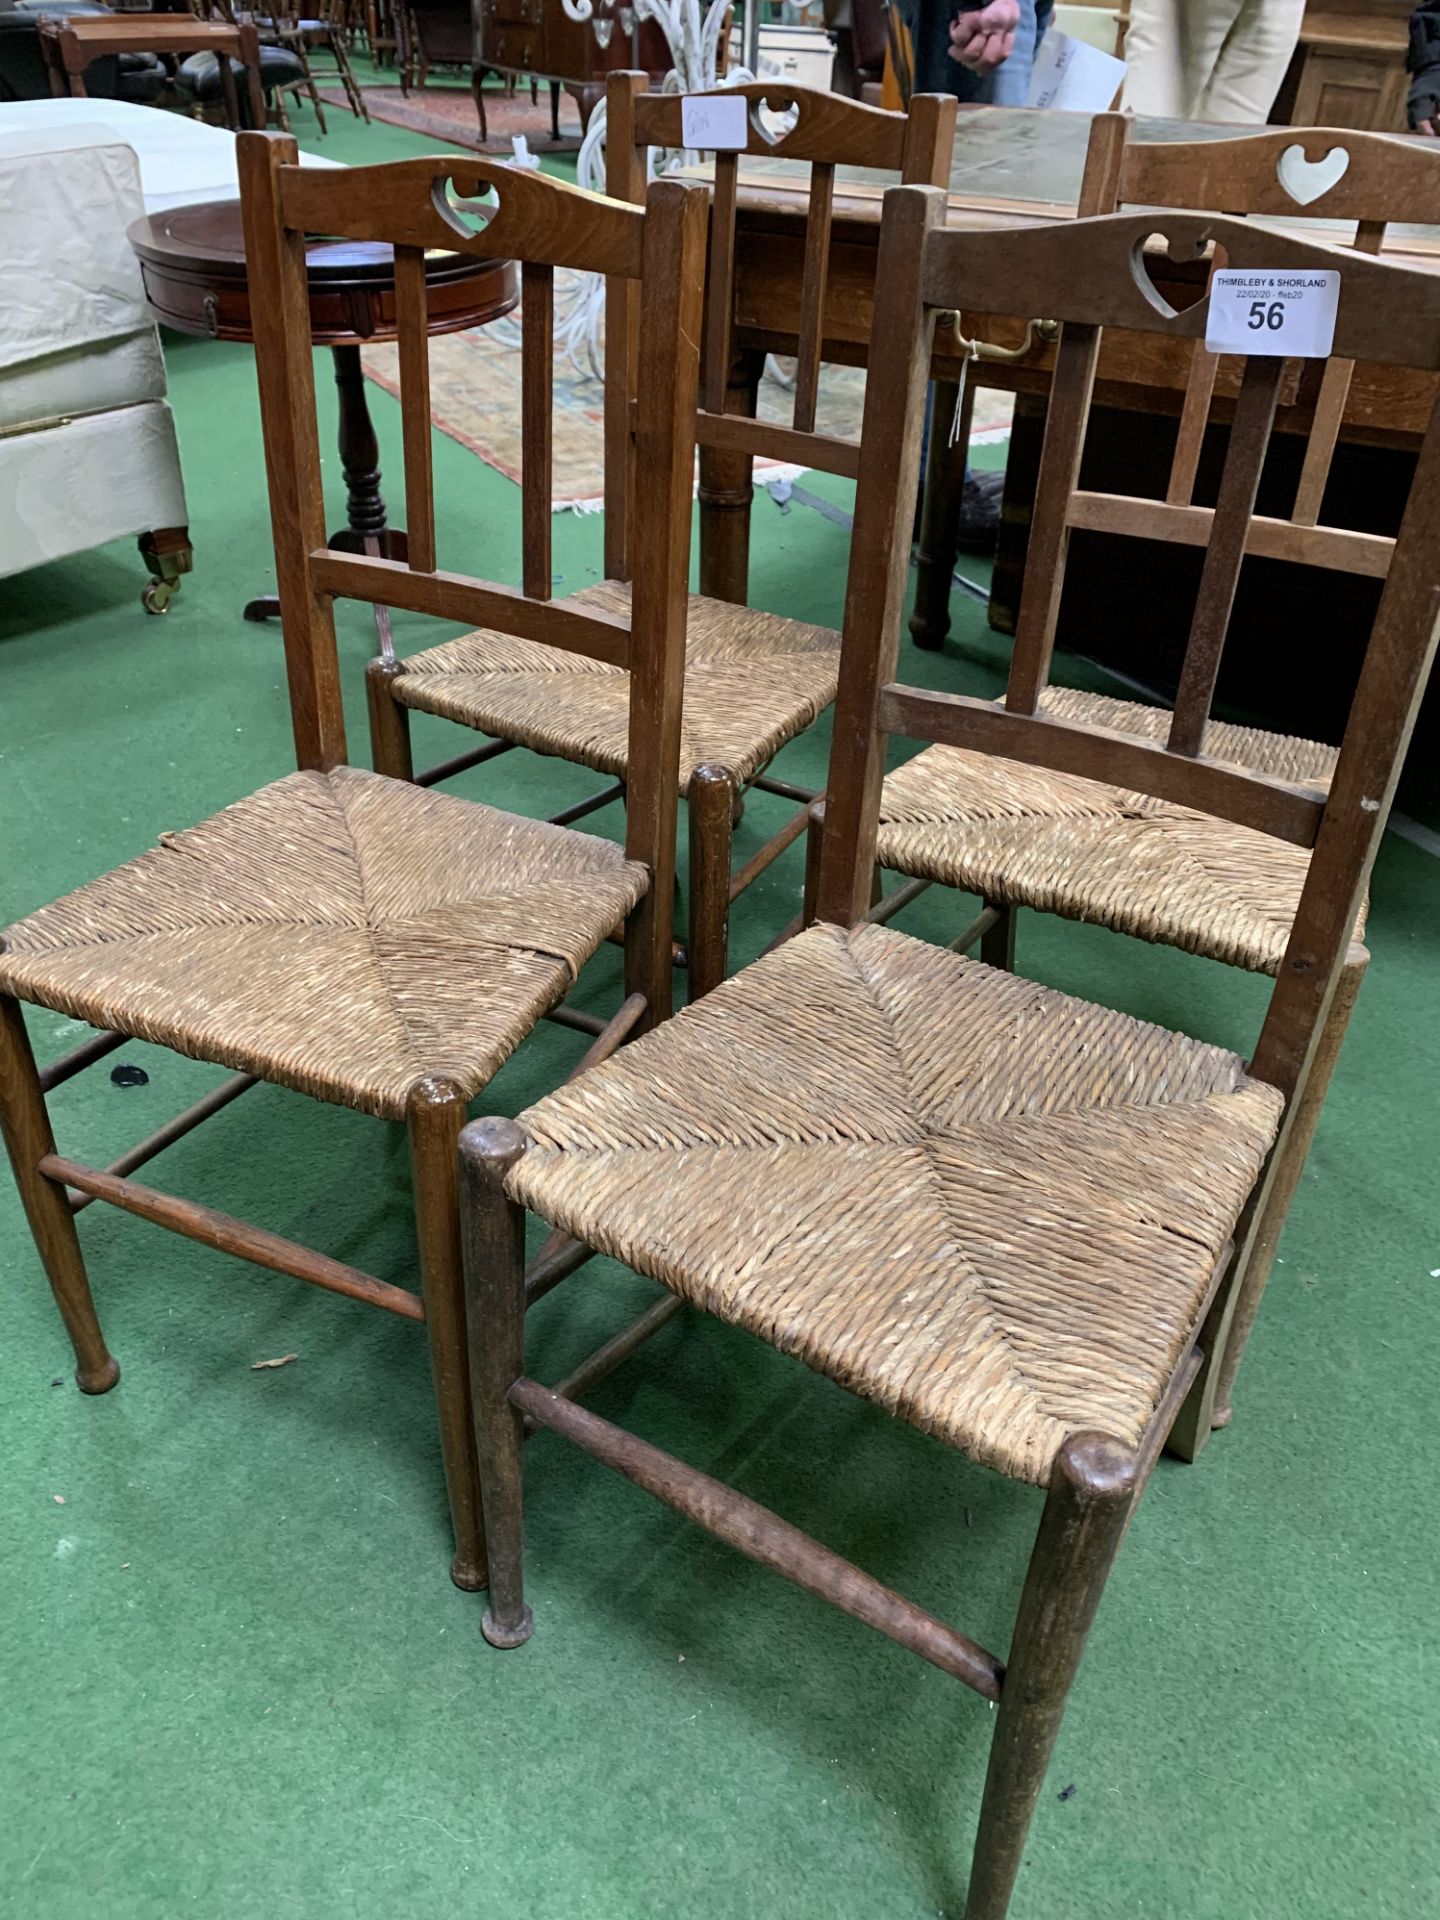 4 string seat chairs. Estimate £10-20. - Image 2 of 4